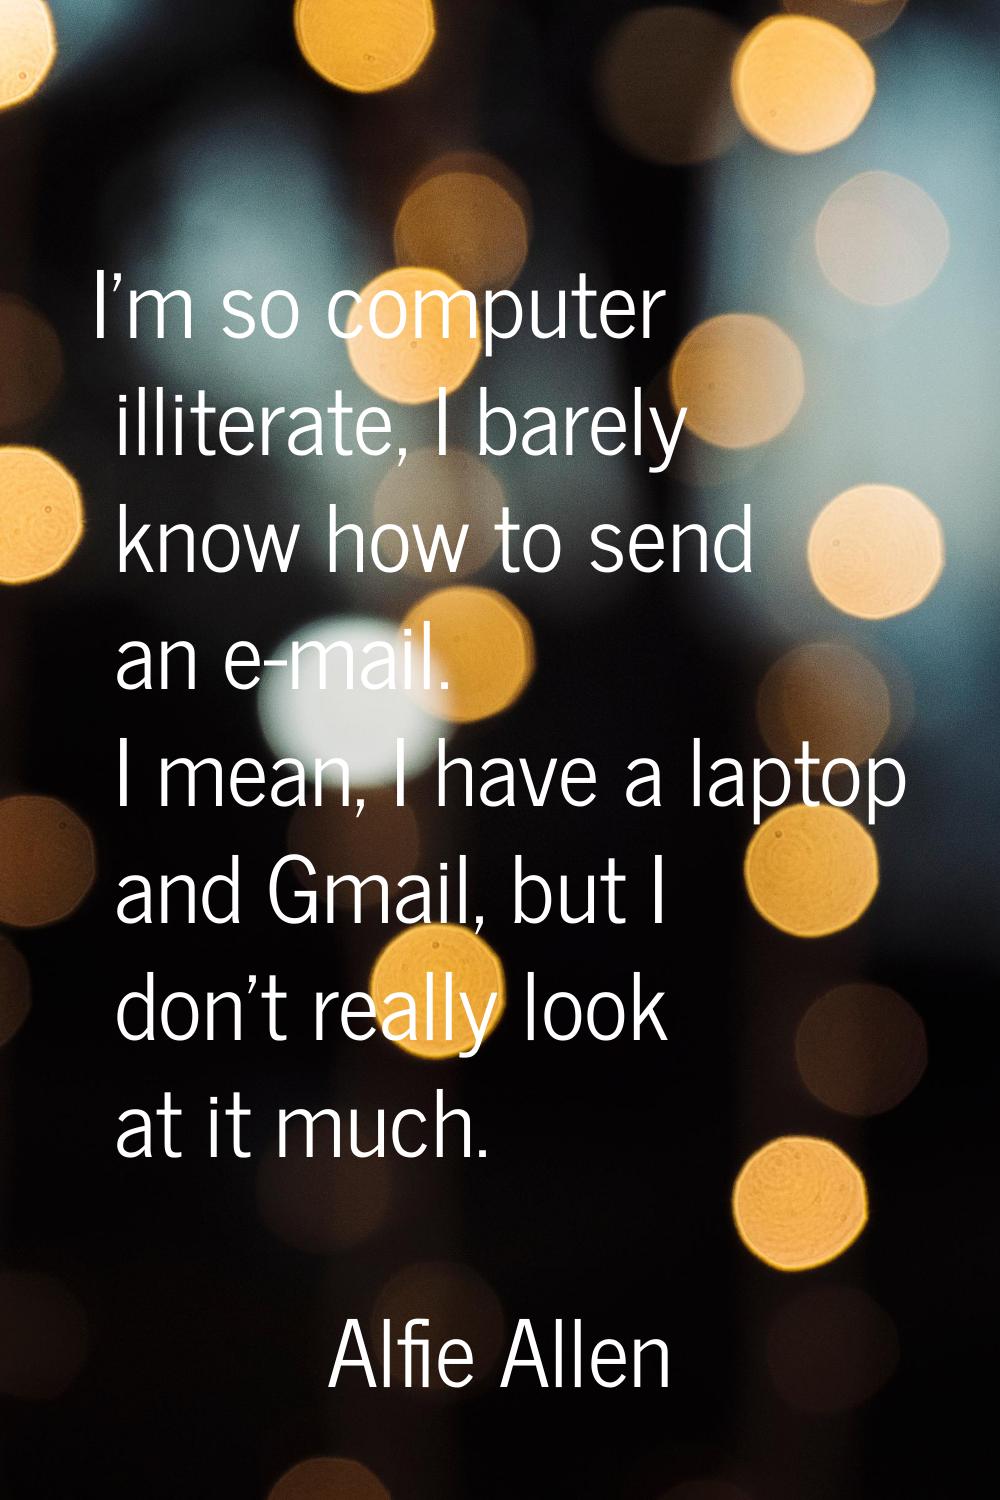 I'm so computer illiterate, I barely know how to send an e-mail. I mean, I have a laptop and Gmail,